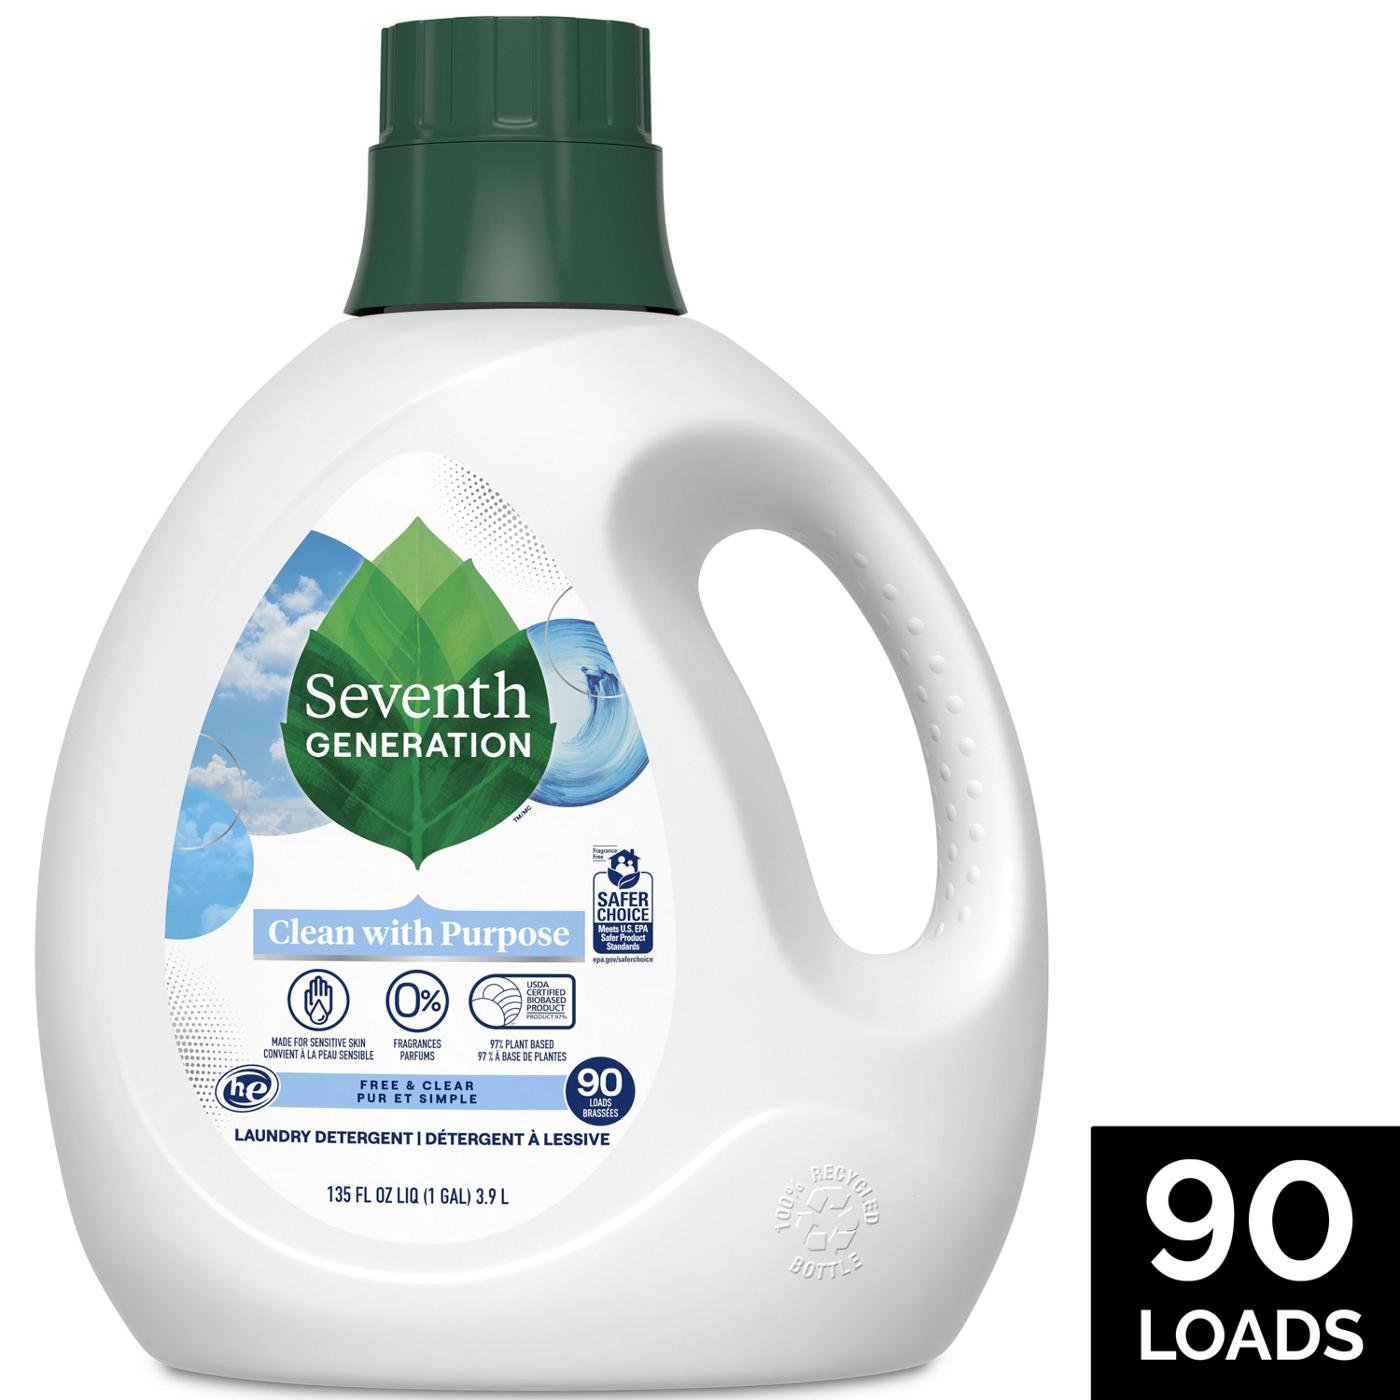 Seventh Generation HE Liquid Laundry Detergent, 90 Loads - Free & Clear; image 12 of 12